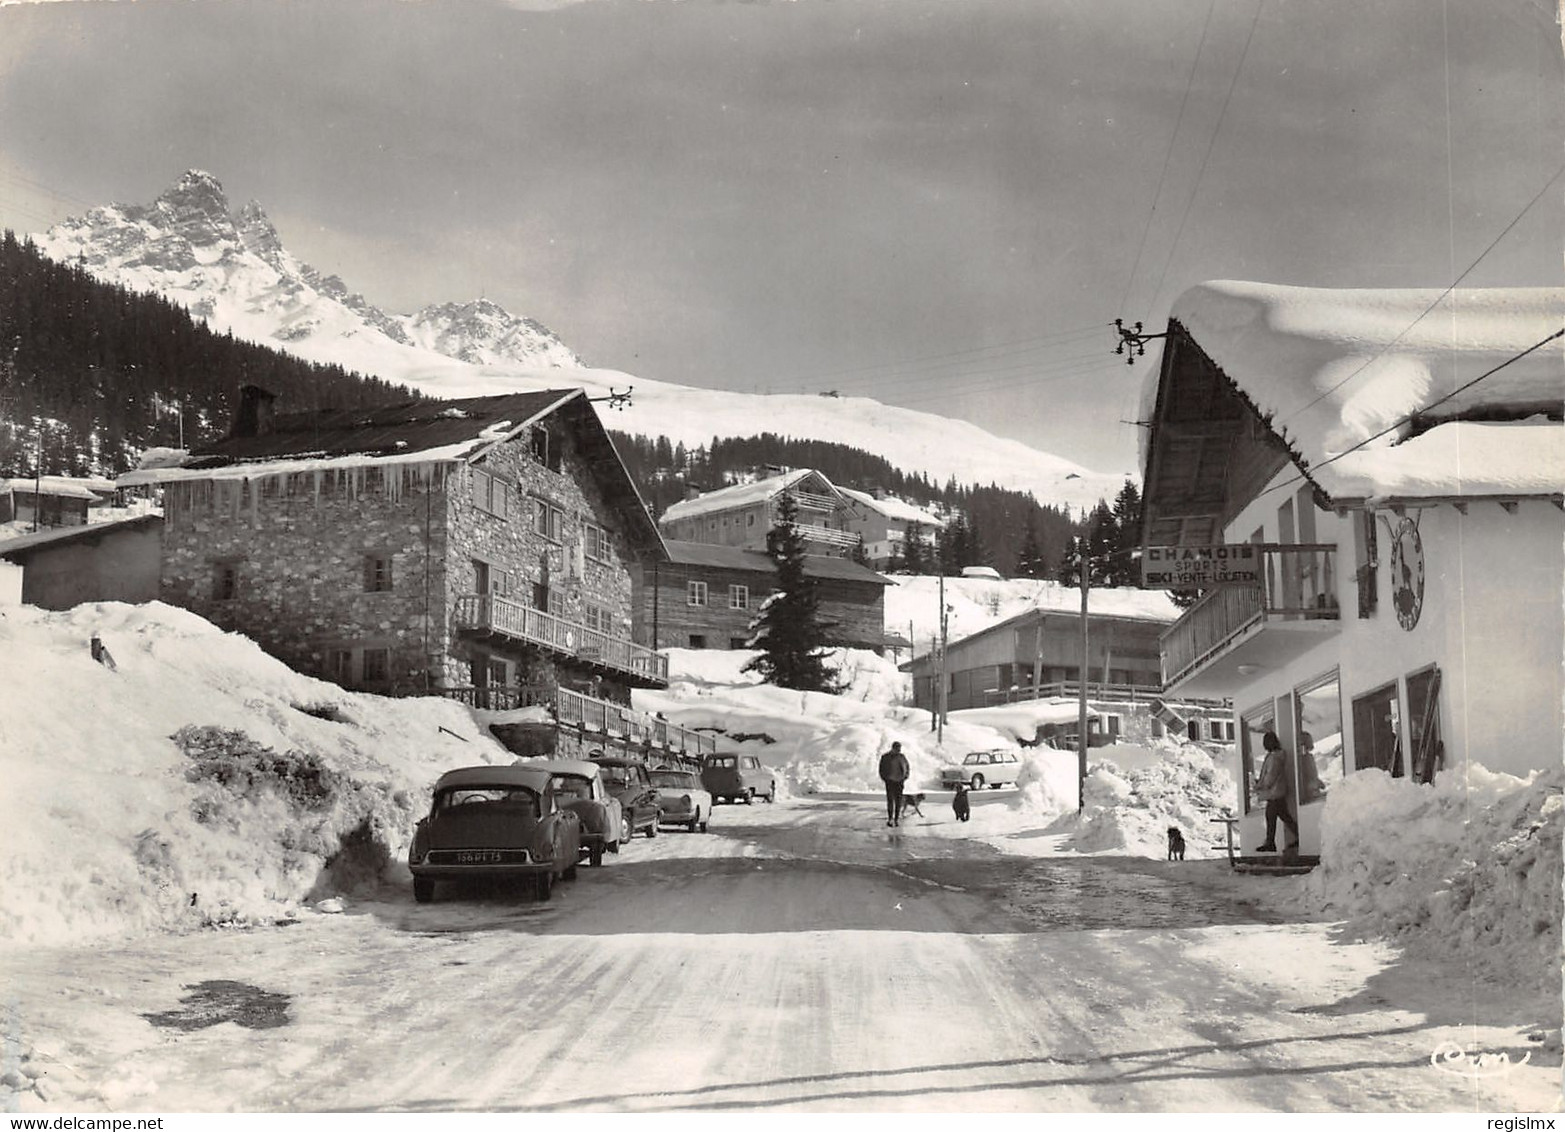 A History of the Three Valleys Ski Area - Chalet Floralie